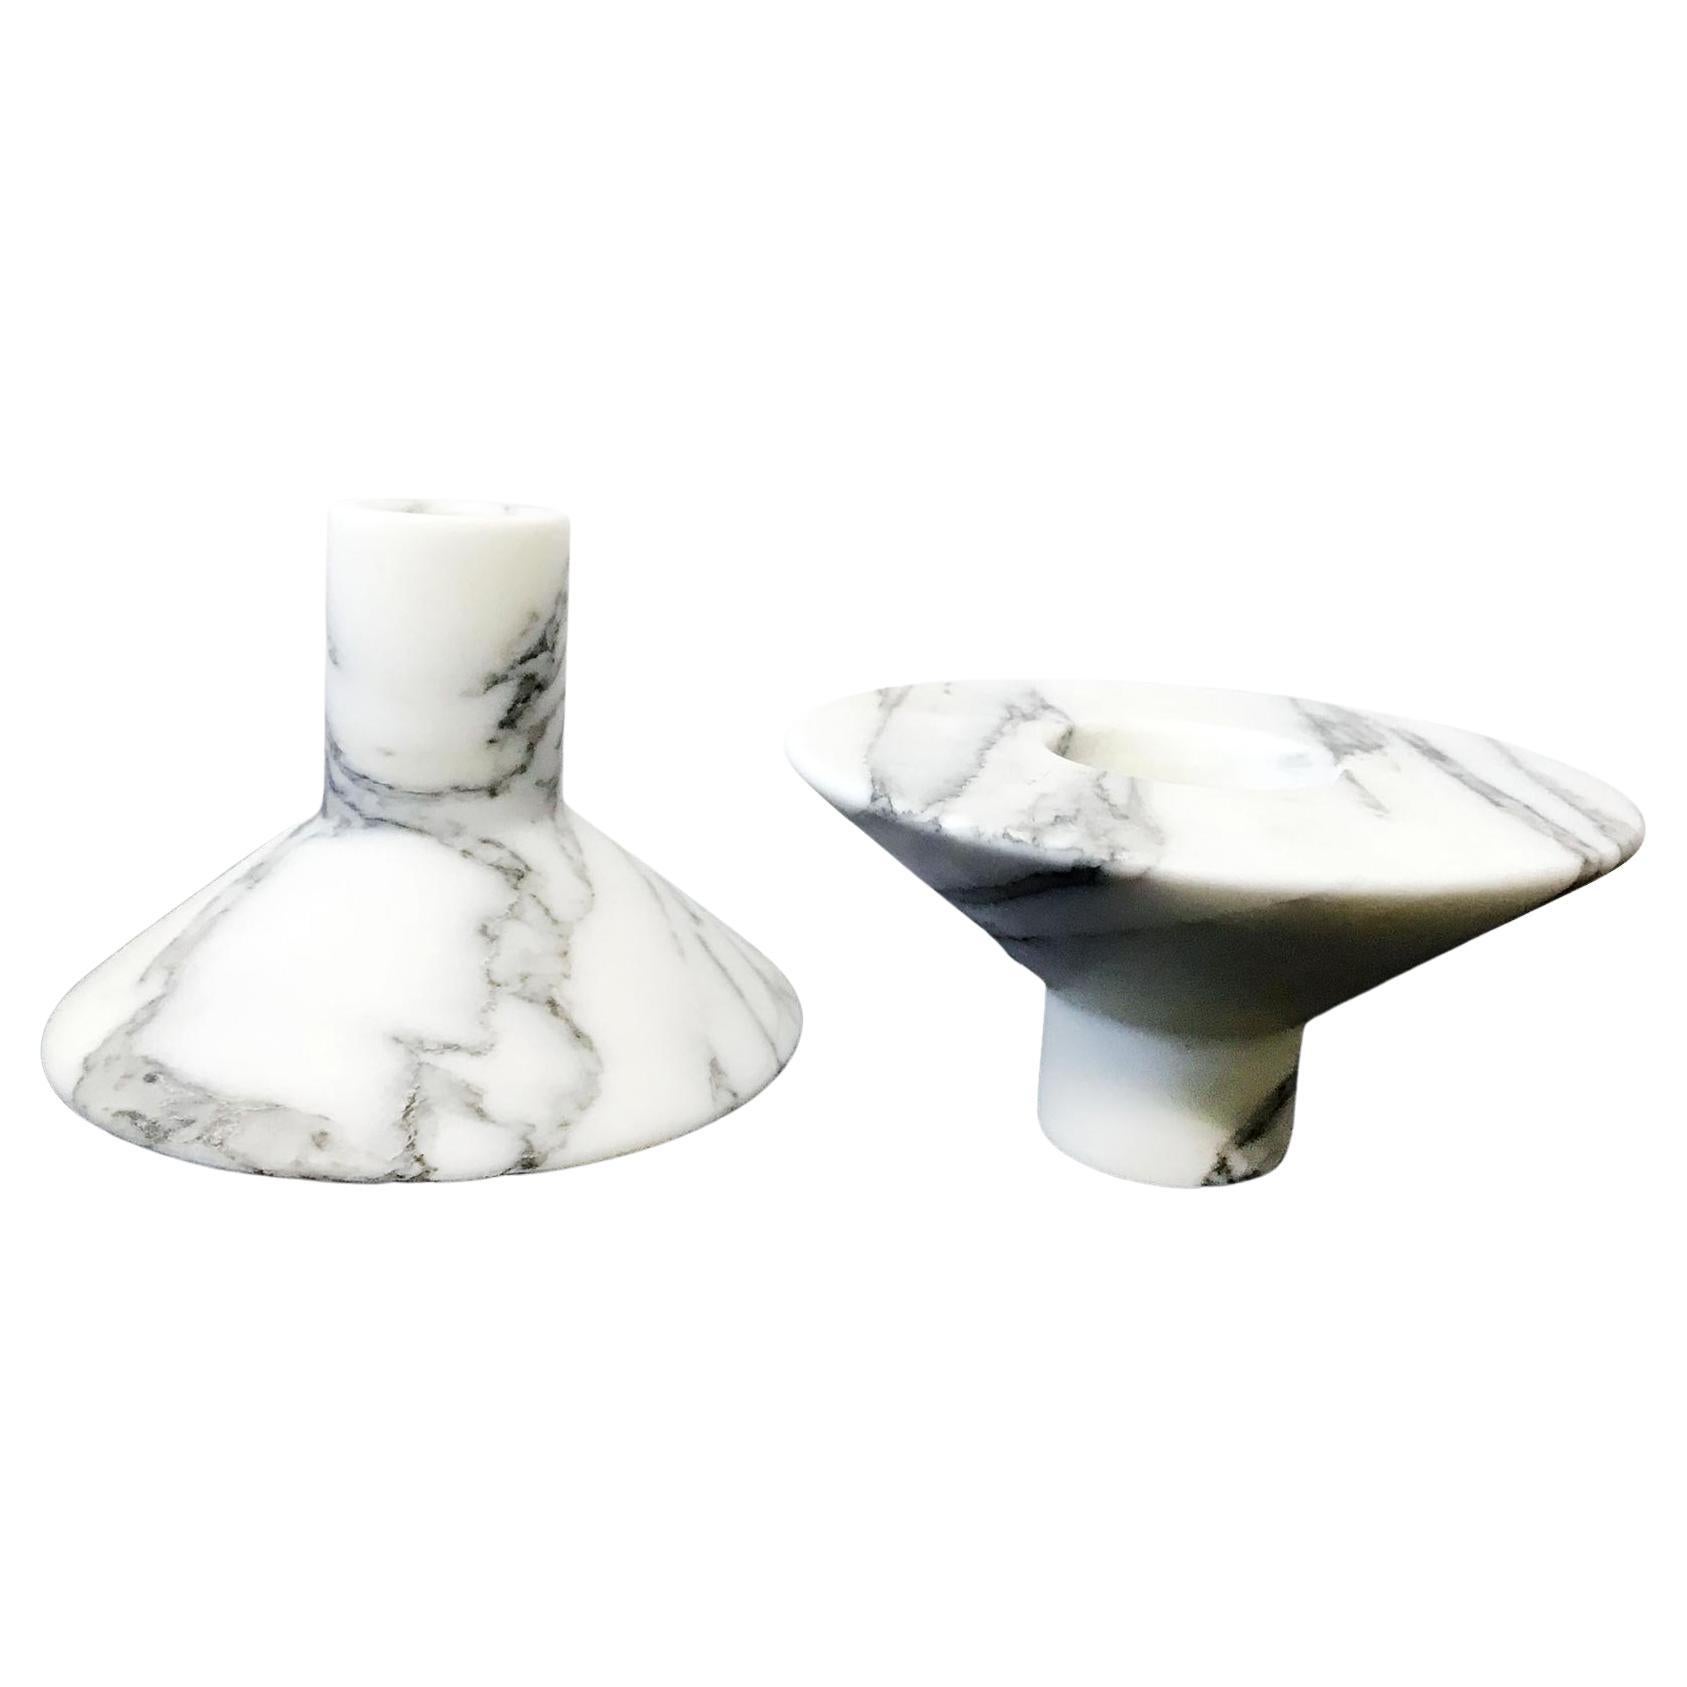 21st Century by Marco Marino"Reverse" Marble Candle Holder in White Carrara